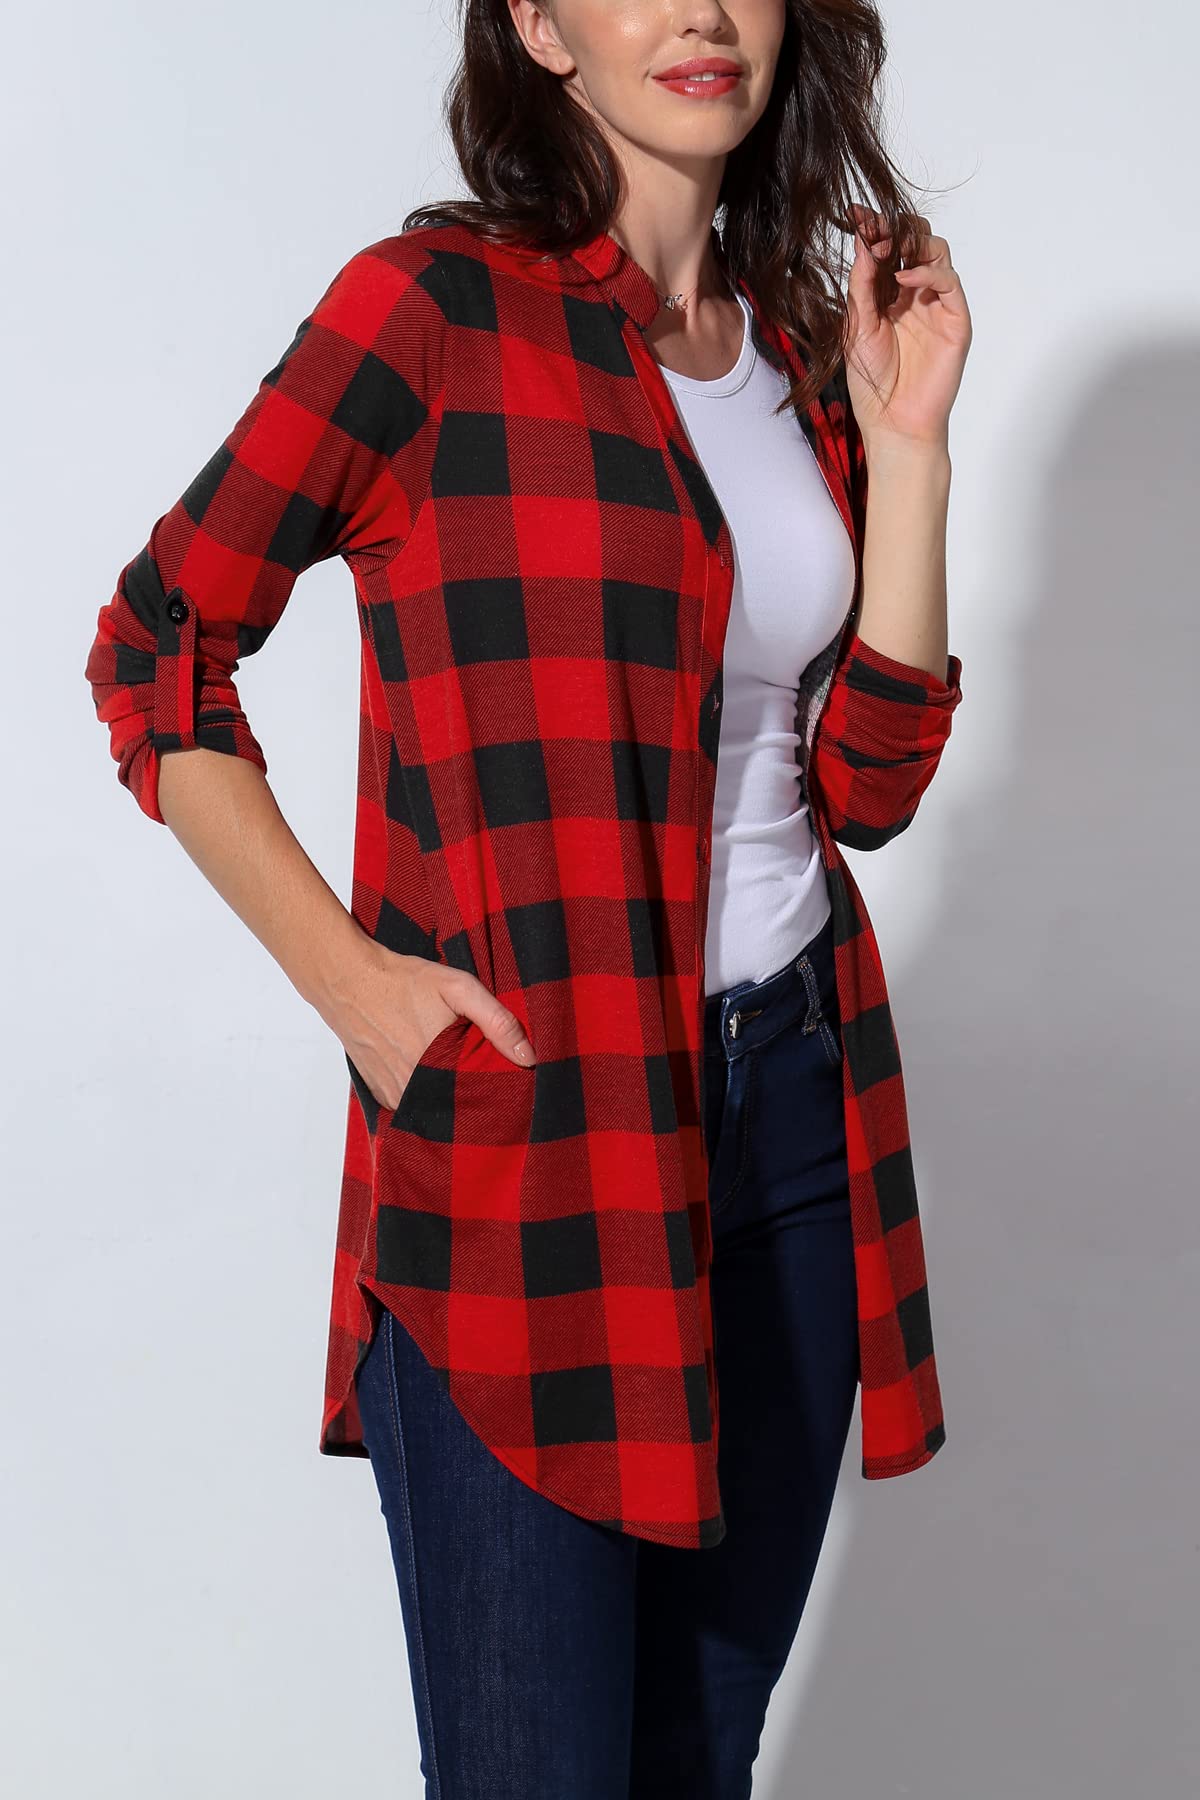 DJT Roll Up 3/4 Sleeve Red Plaid Women's Soft Knitted Pockets Casual Button Down Plaid Shirts